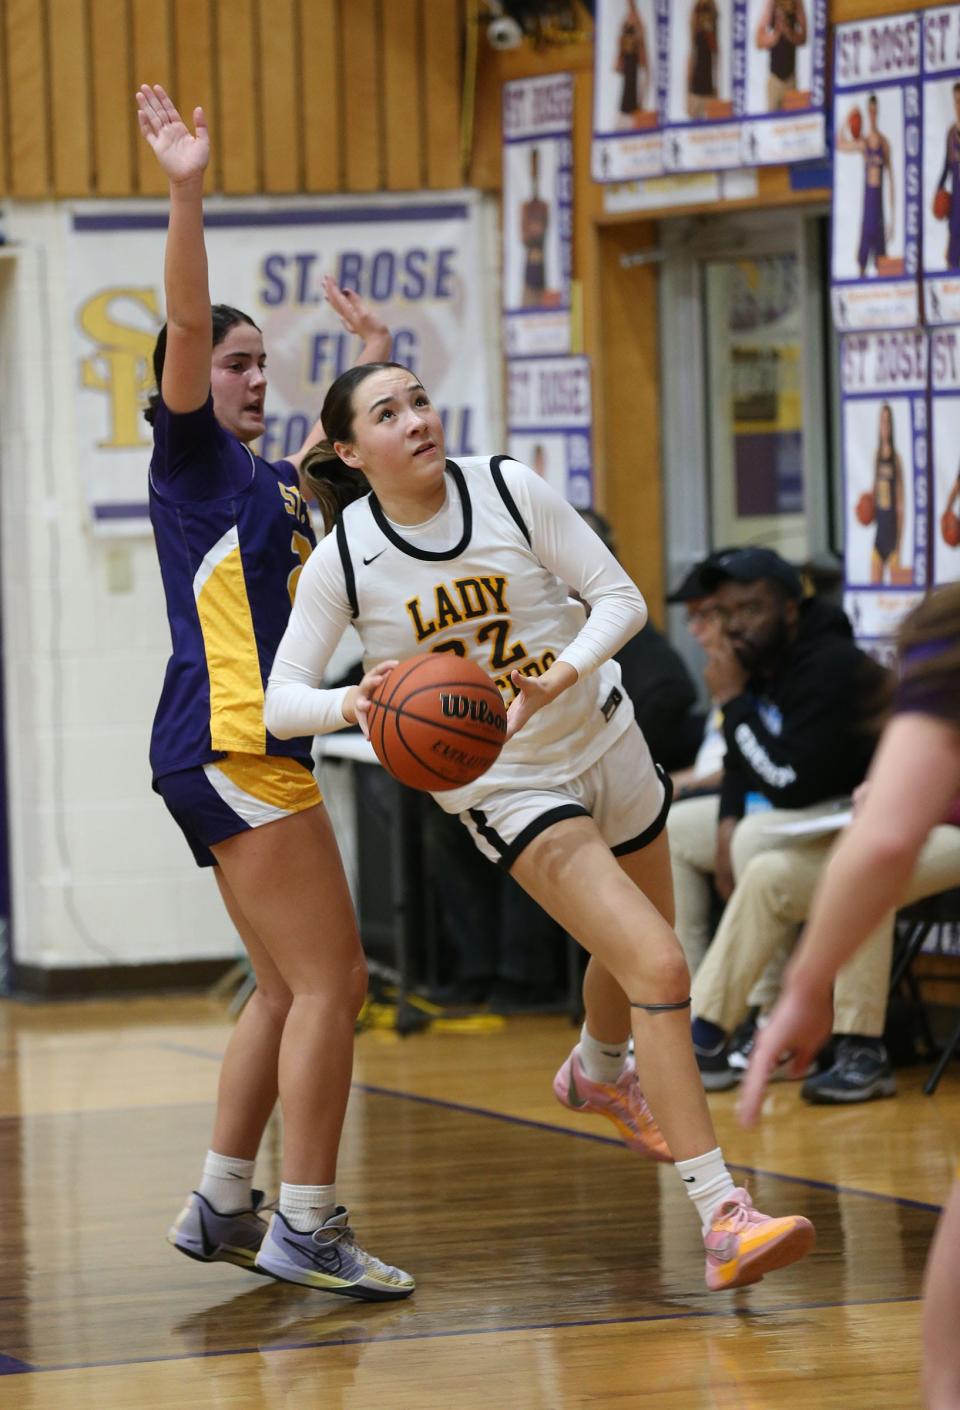 St. John Vianney'sMadison Kocis (#22) drives around St. Rose's Brooke Missry (#20) during their game in Belmar Wednesday evening, January 31, 2024.